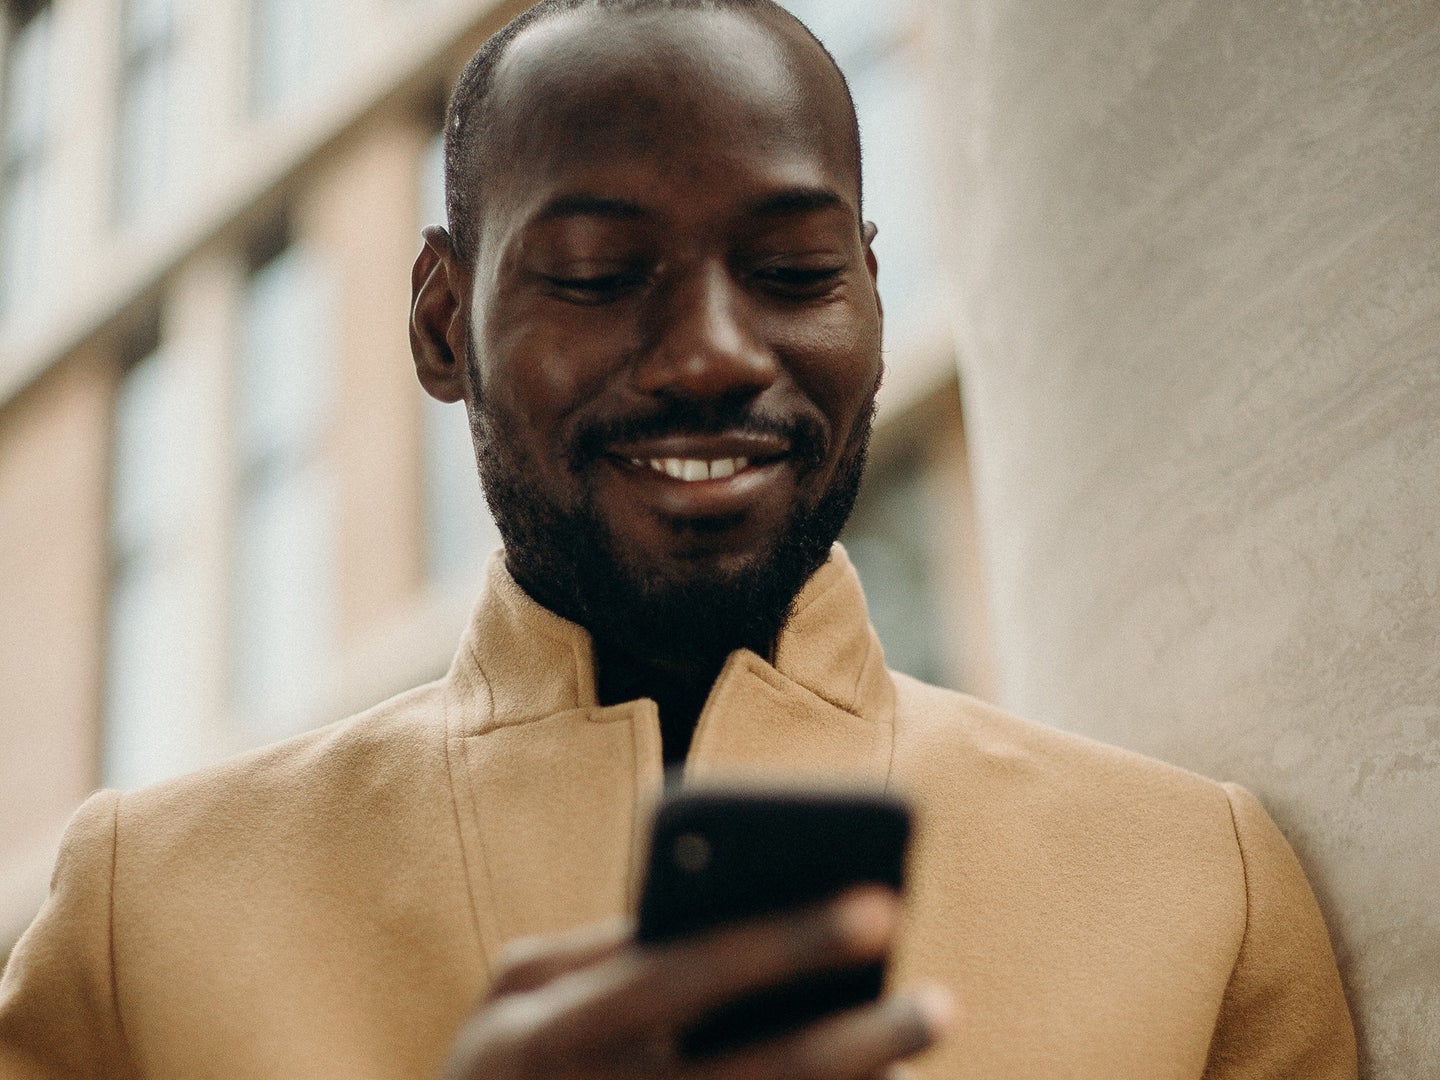 close up of an well dressed black person smiling while looking at their phone